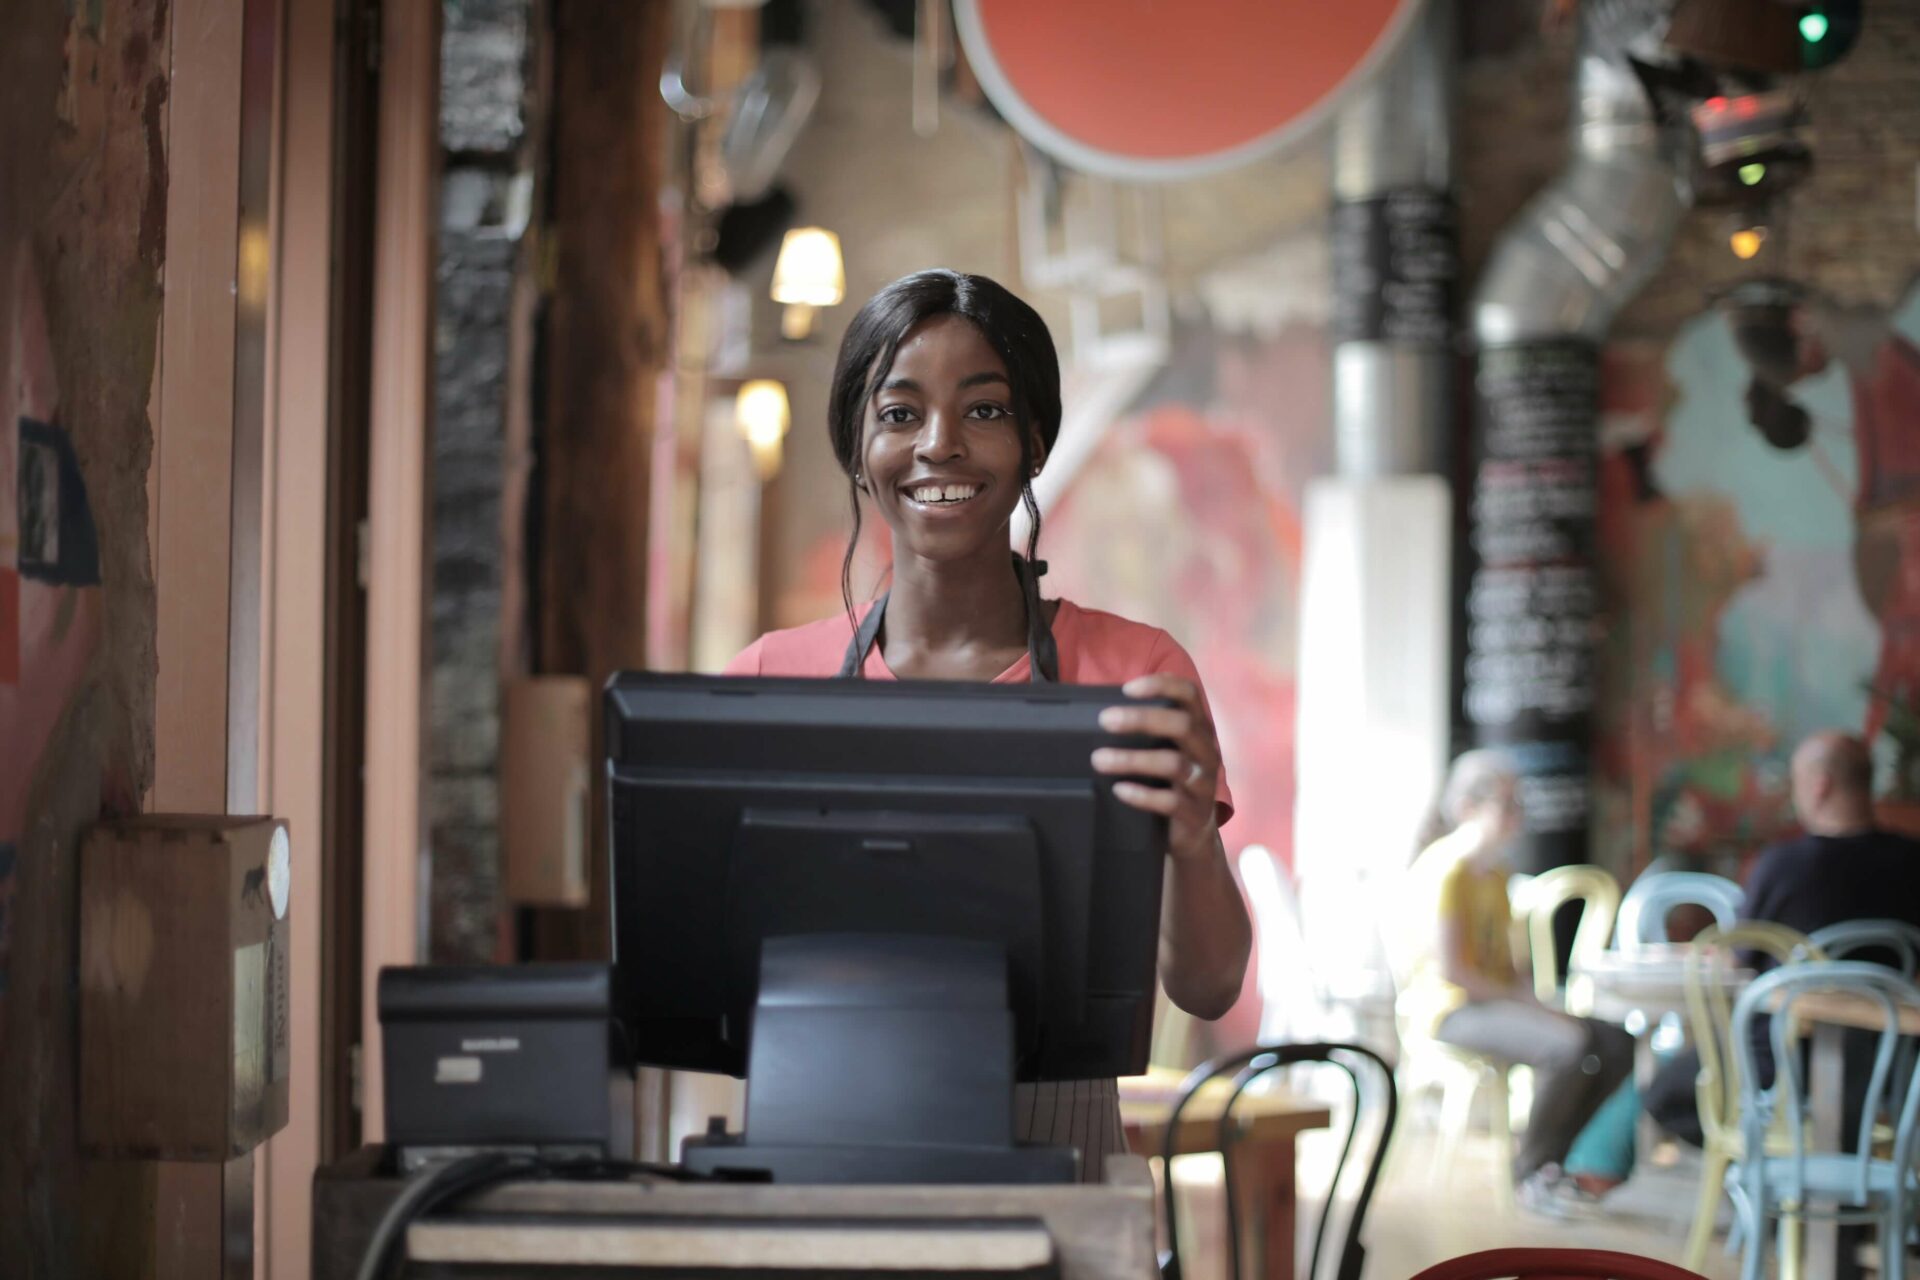 Smiling woman in coffee shop standing next to till